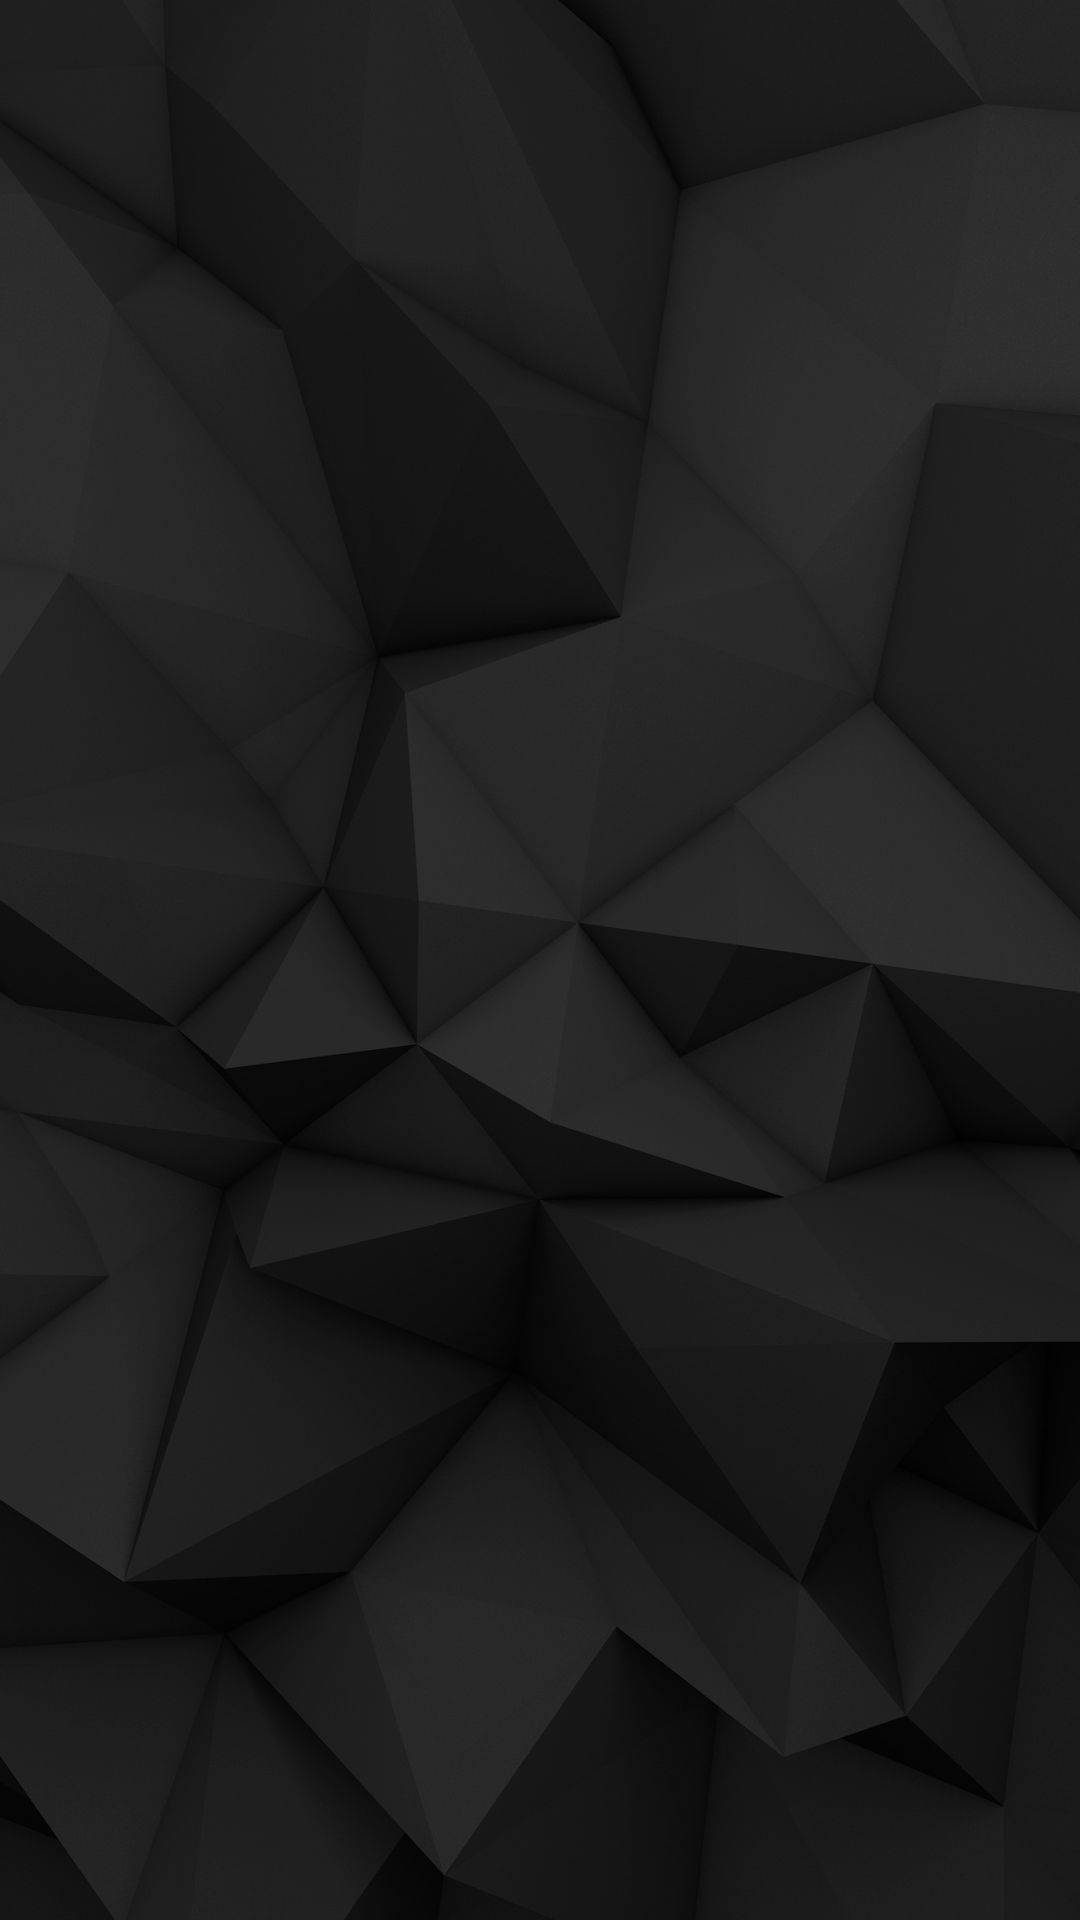 Abstract Geometric Solid Black Iphone Wallpaper